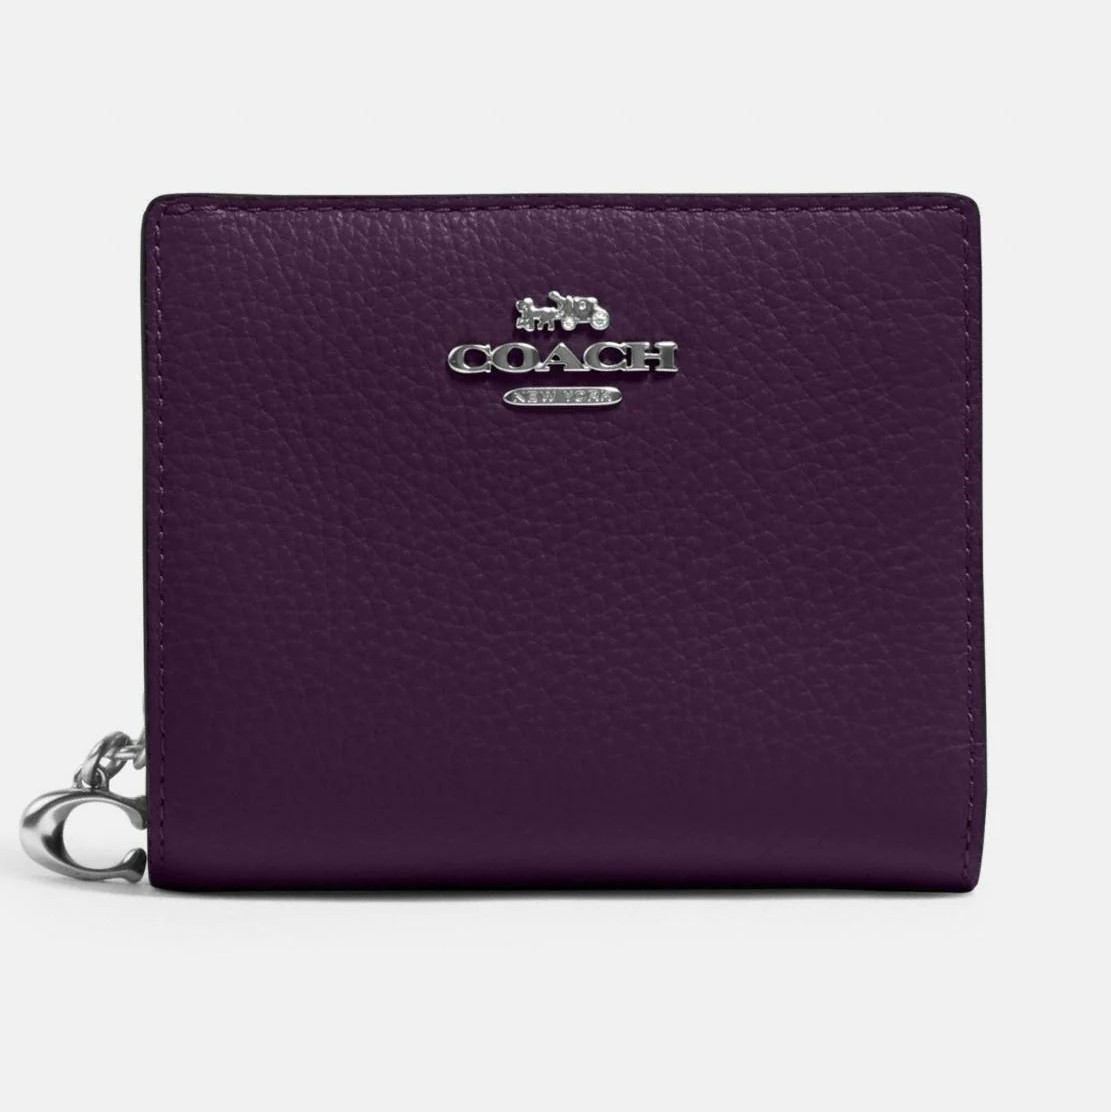 VÍ NGẮN COACH SMALL WALLET PEBBLE LEATHER SNAP WALLET 19